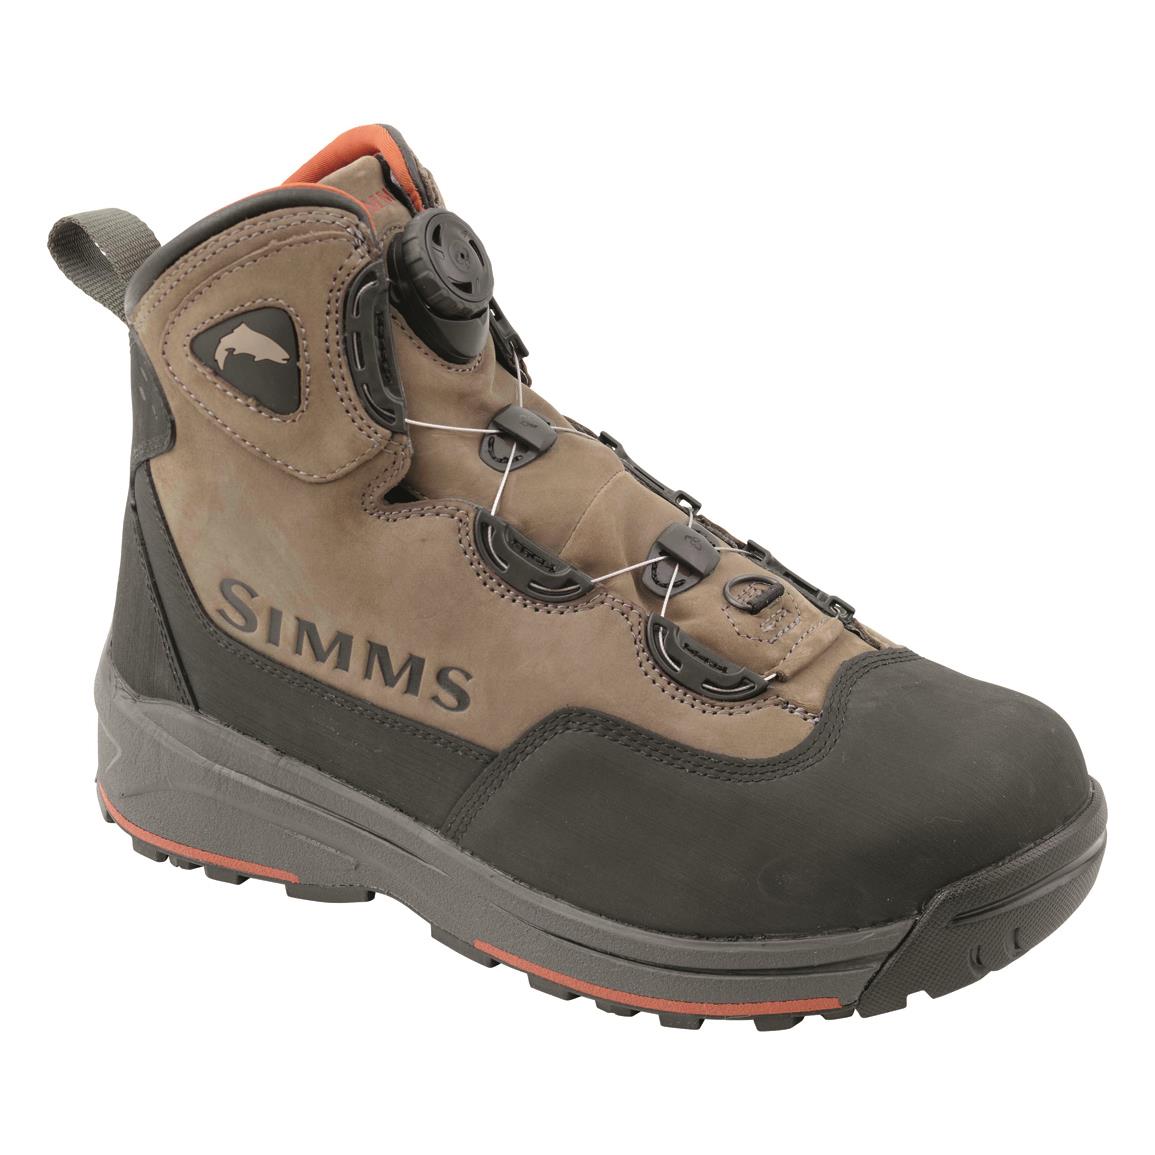 Simms Men's Headwaters BOA Wading Boots, Vibram Rubber Outsole, Wetstone